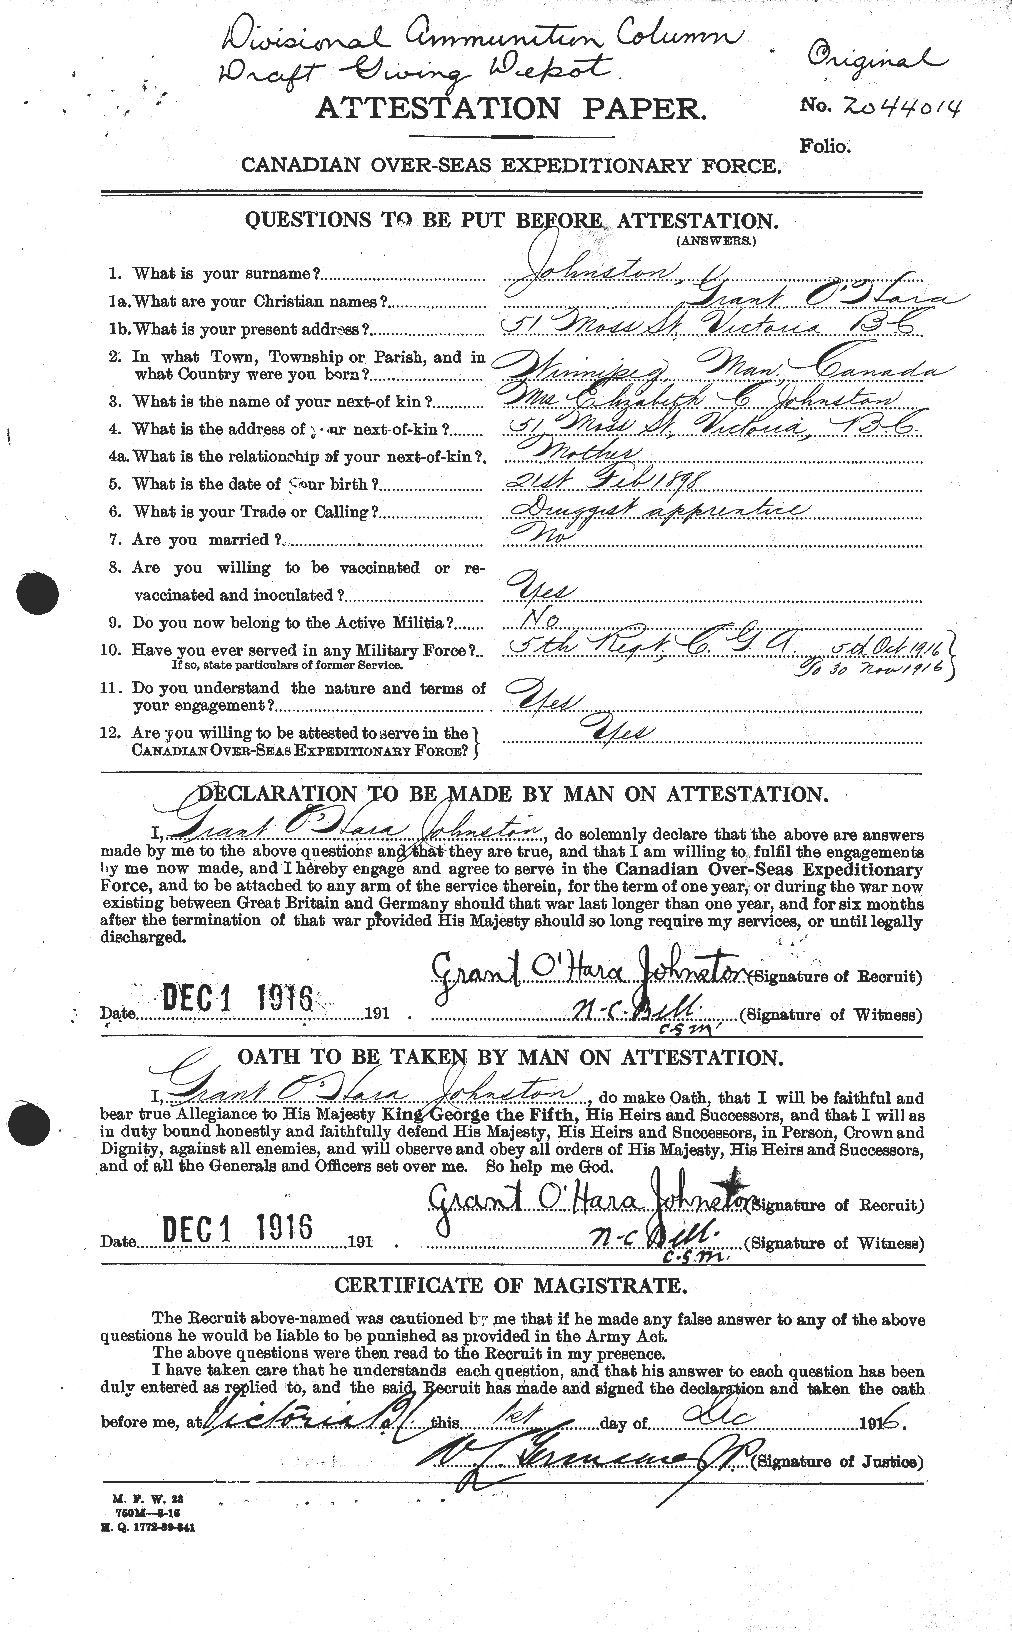 Personnel Records of the First World War - CEF 419477a